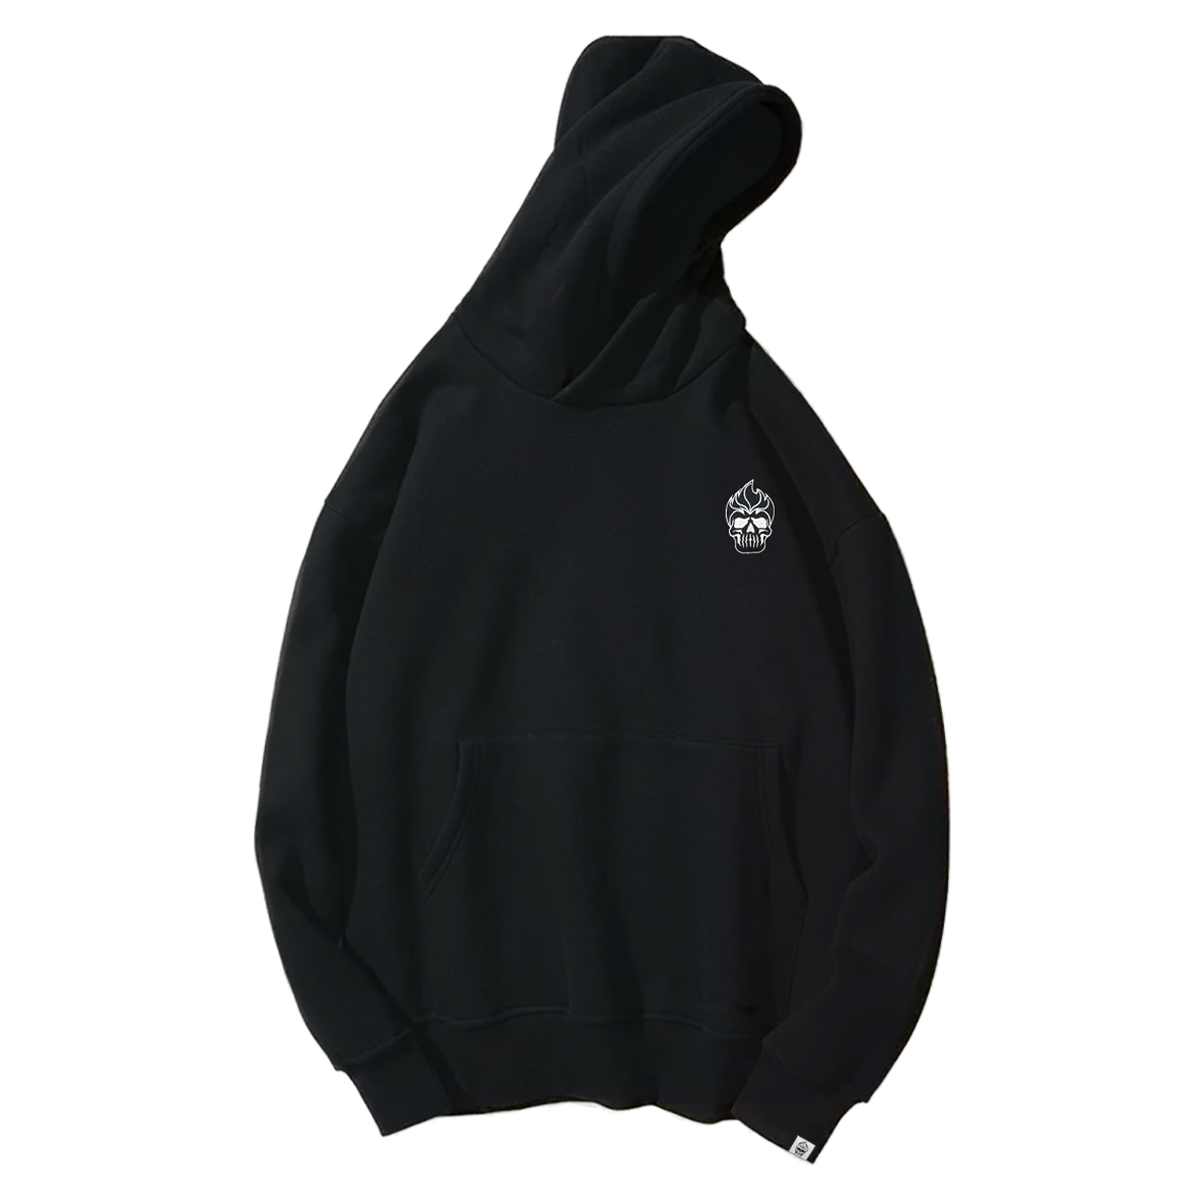 INCARNAPE ASTROS "READY2REIGN" PULL-OVER HOODIE